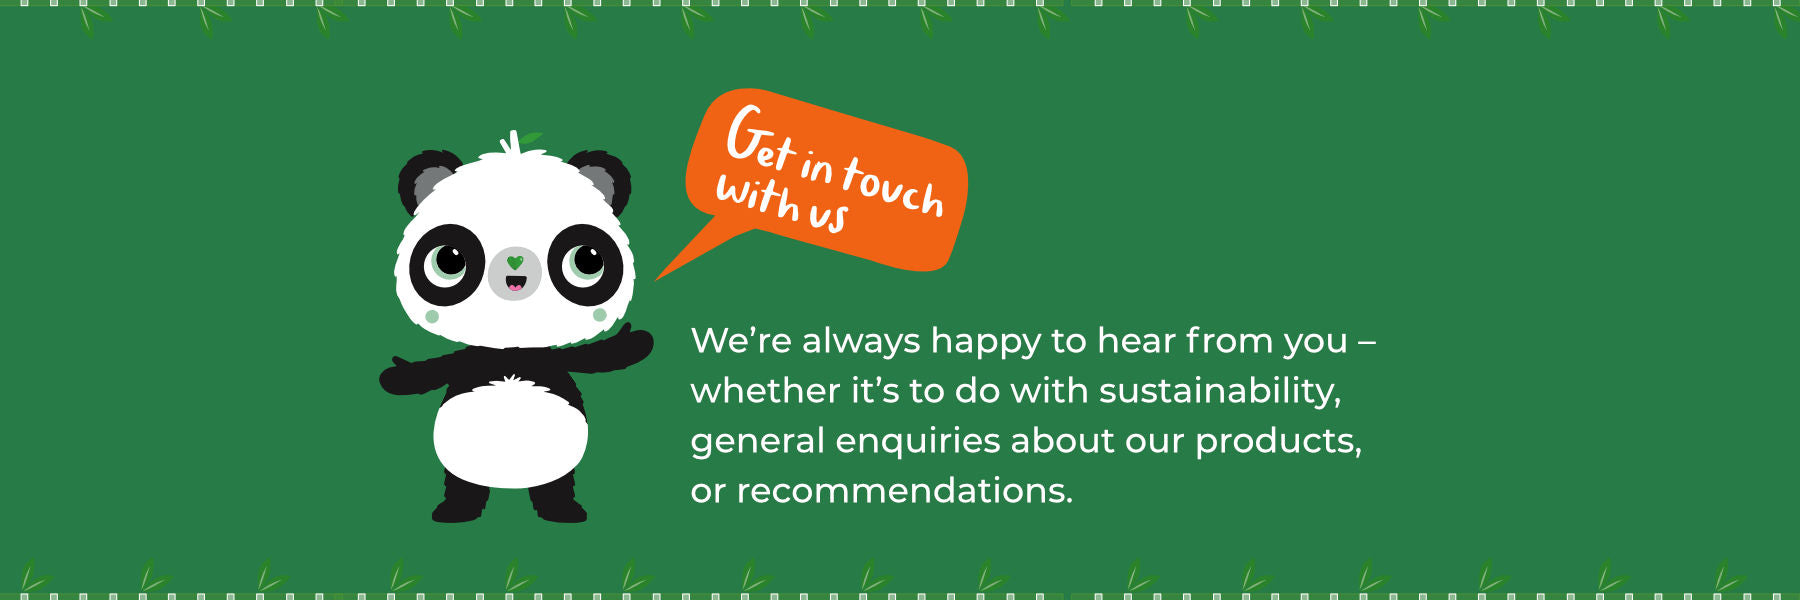 Get in touch with us. We’re always happy to hear from you – whether it’s to do with sustainability, general enquiries about our products, or recommendations.